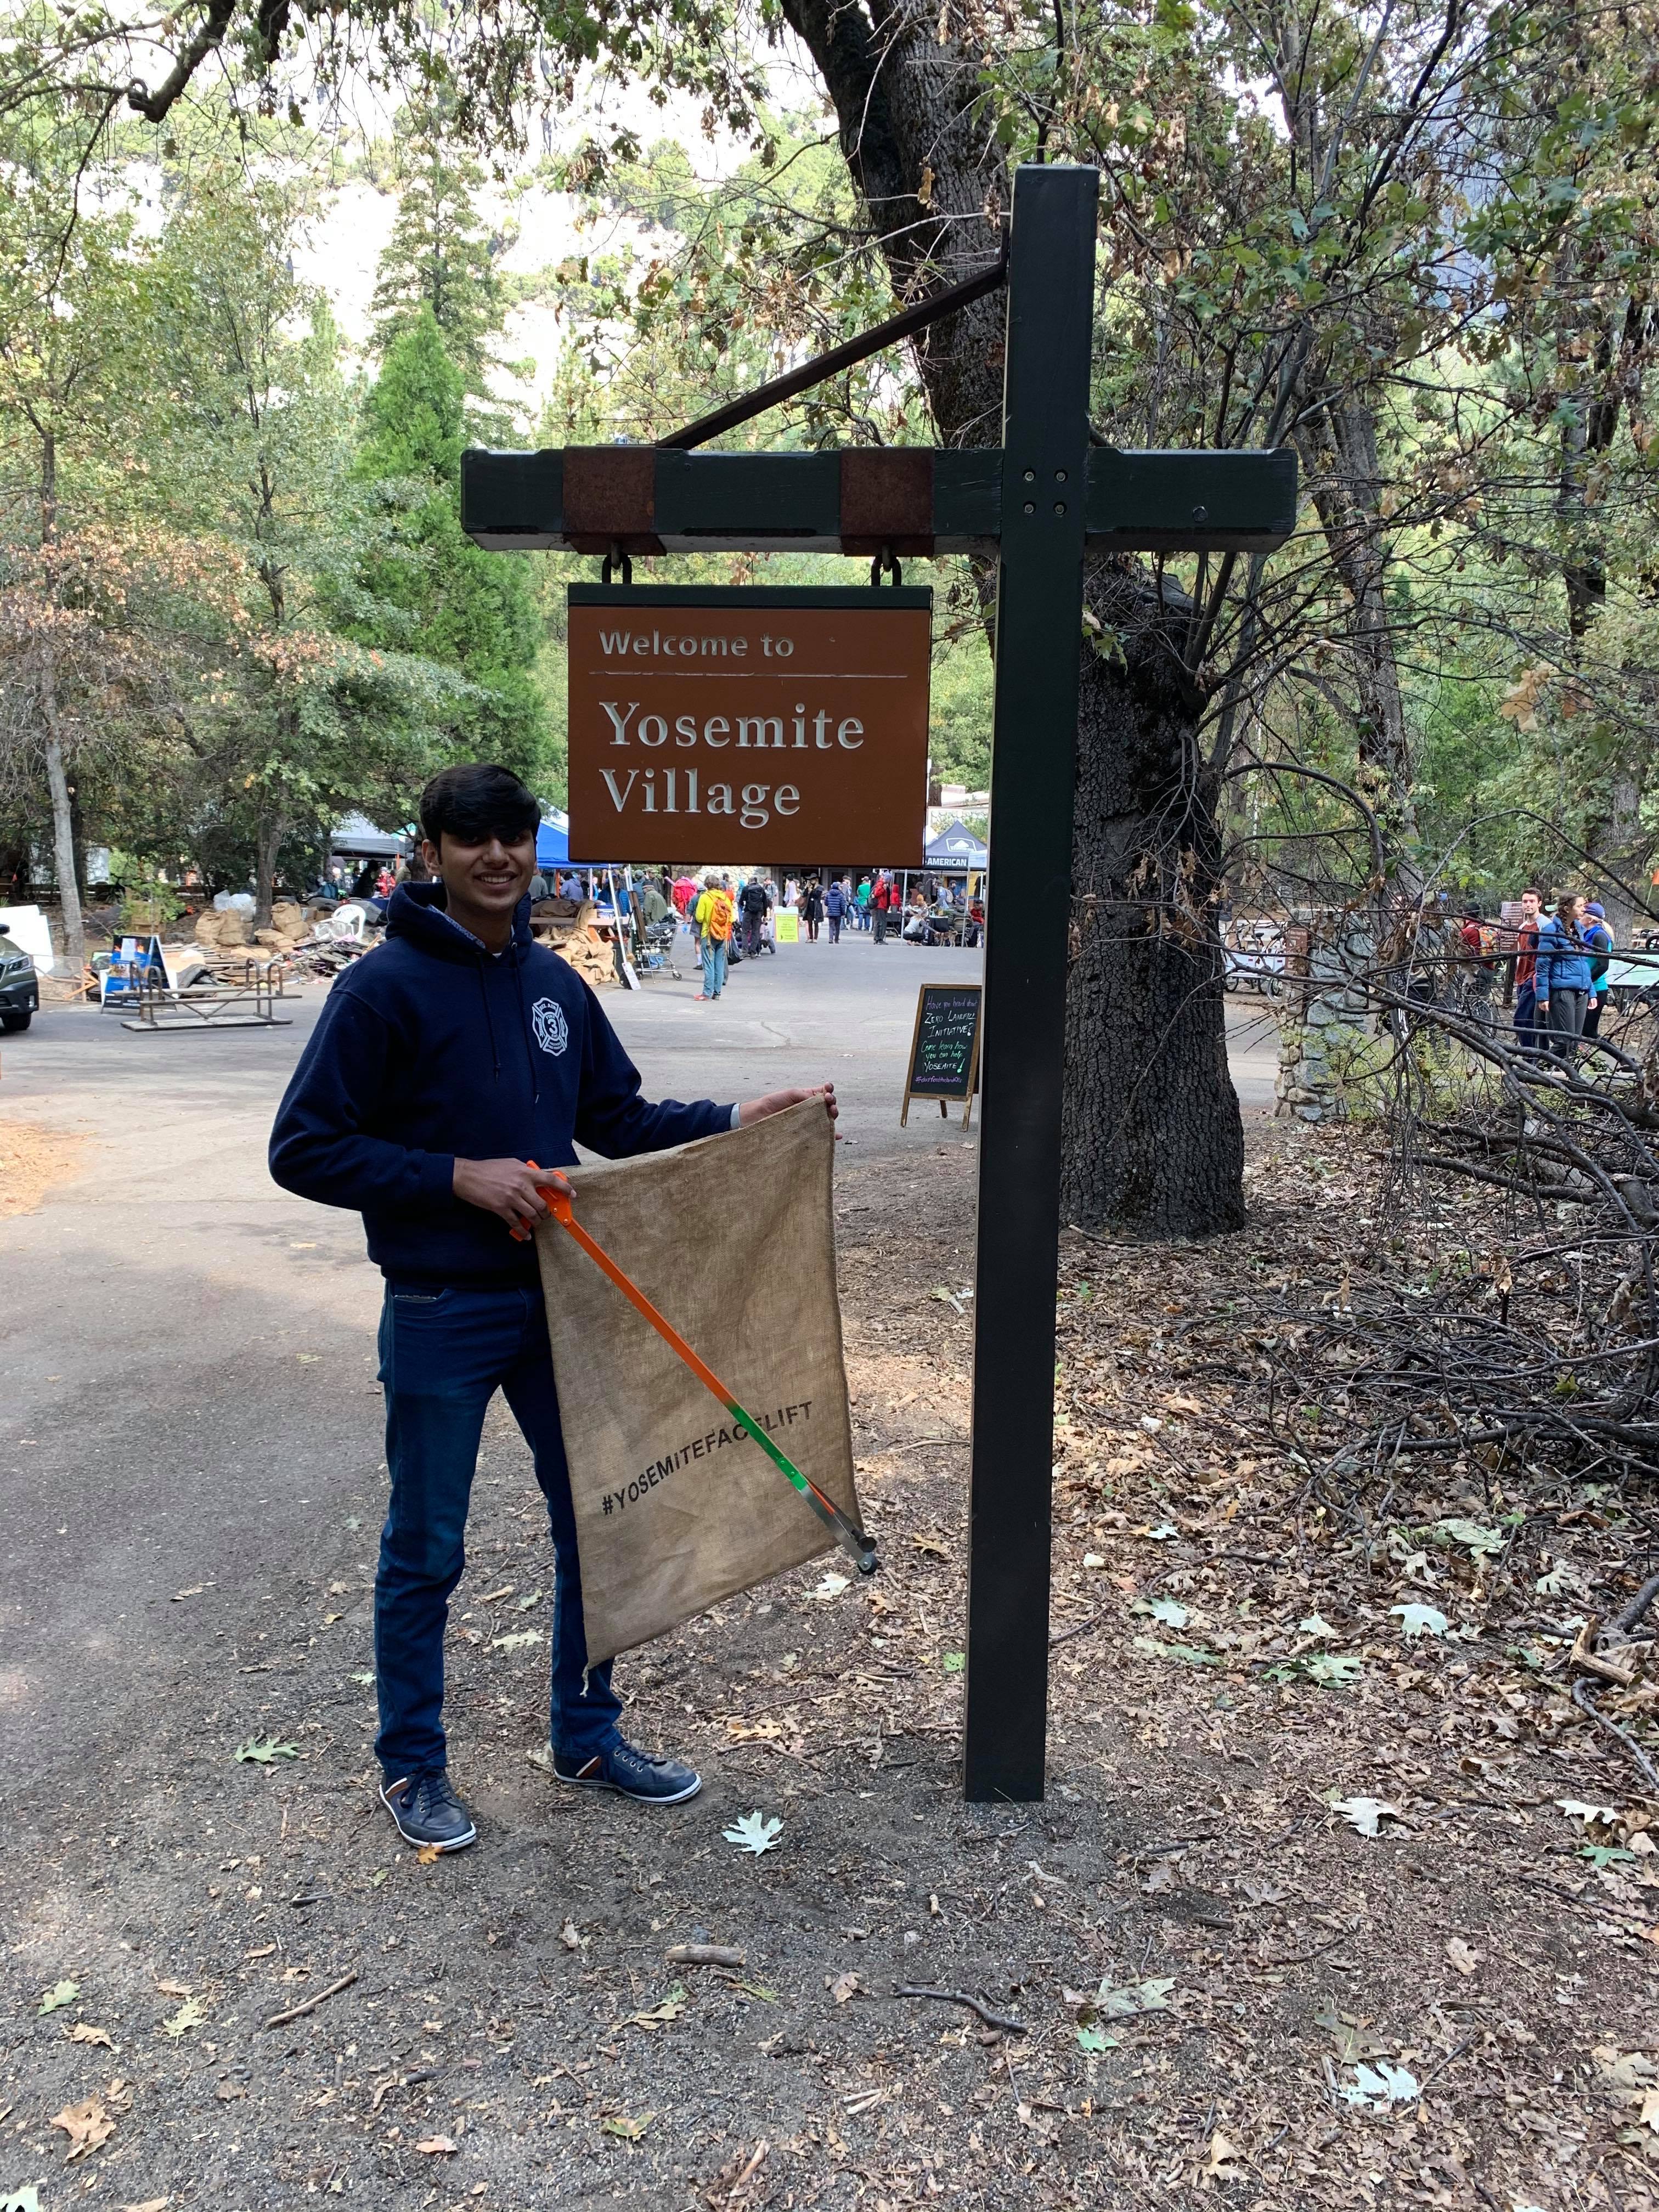 YES student stands next to a sign that says "Yosemite Village"